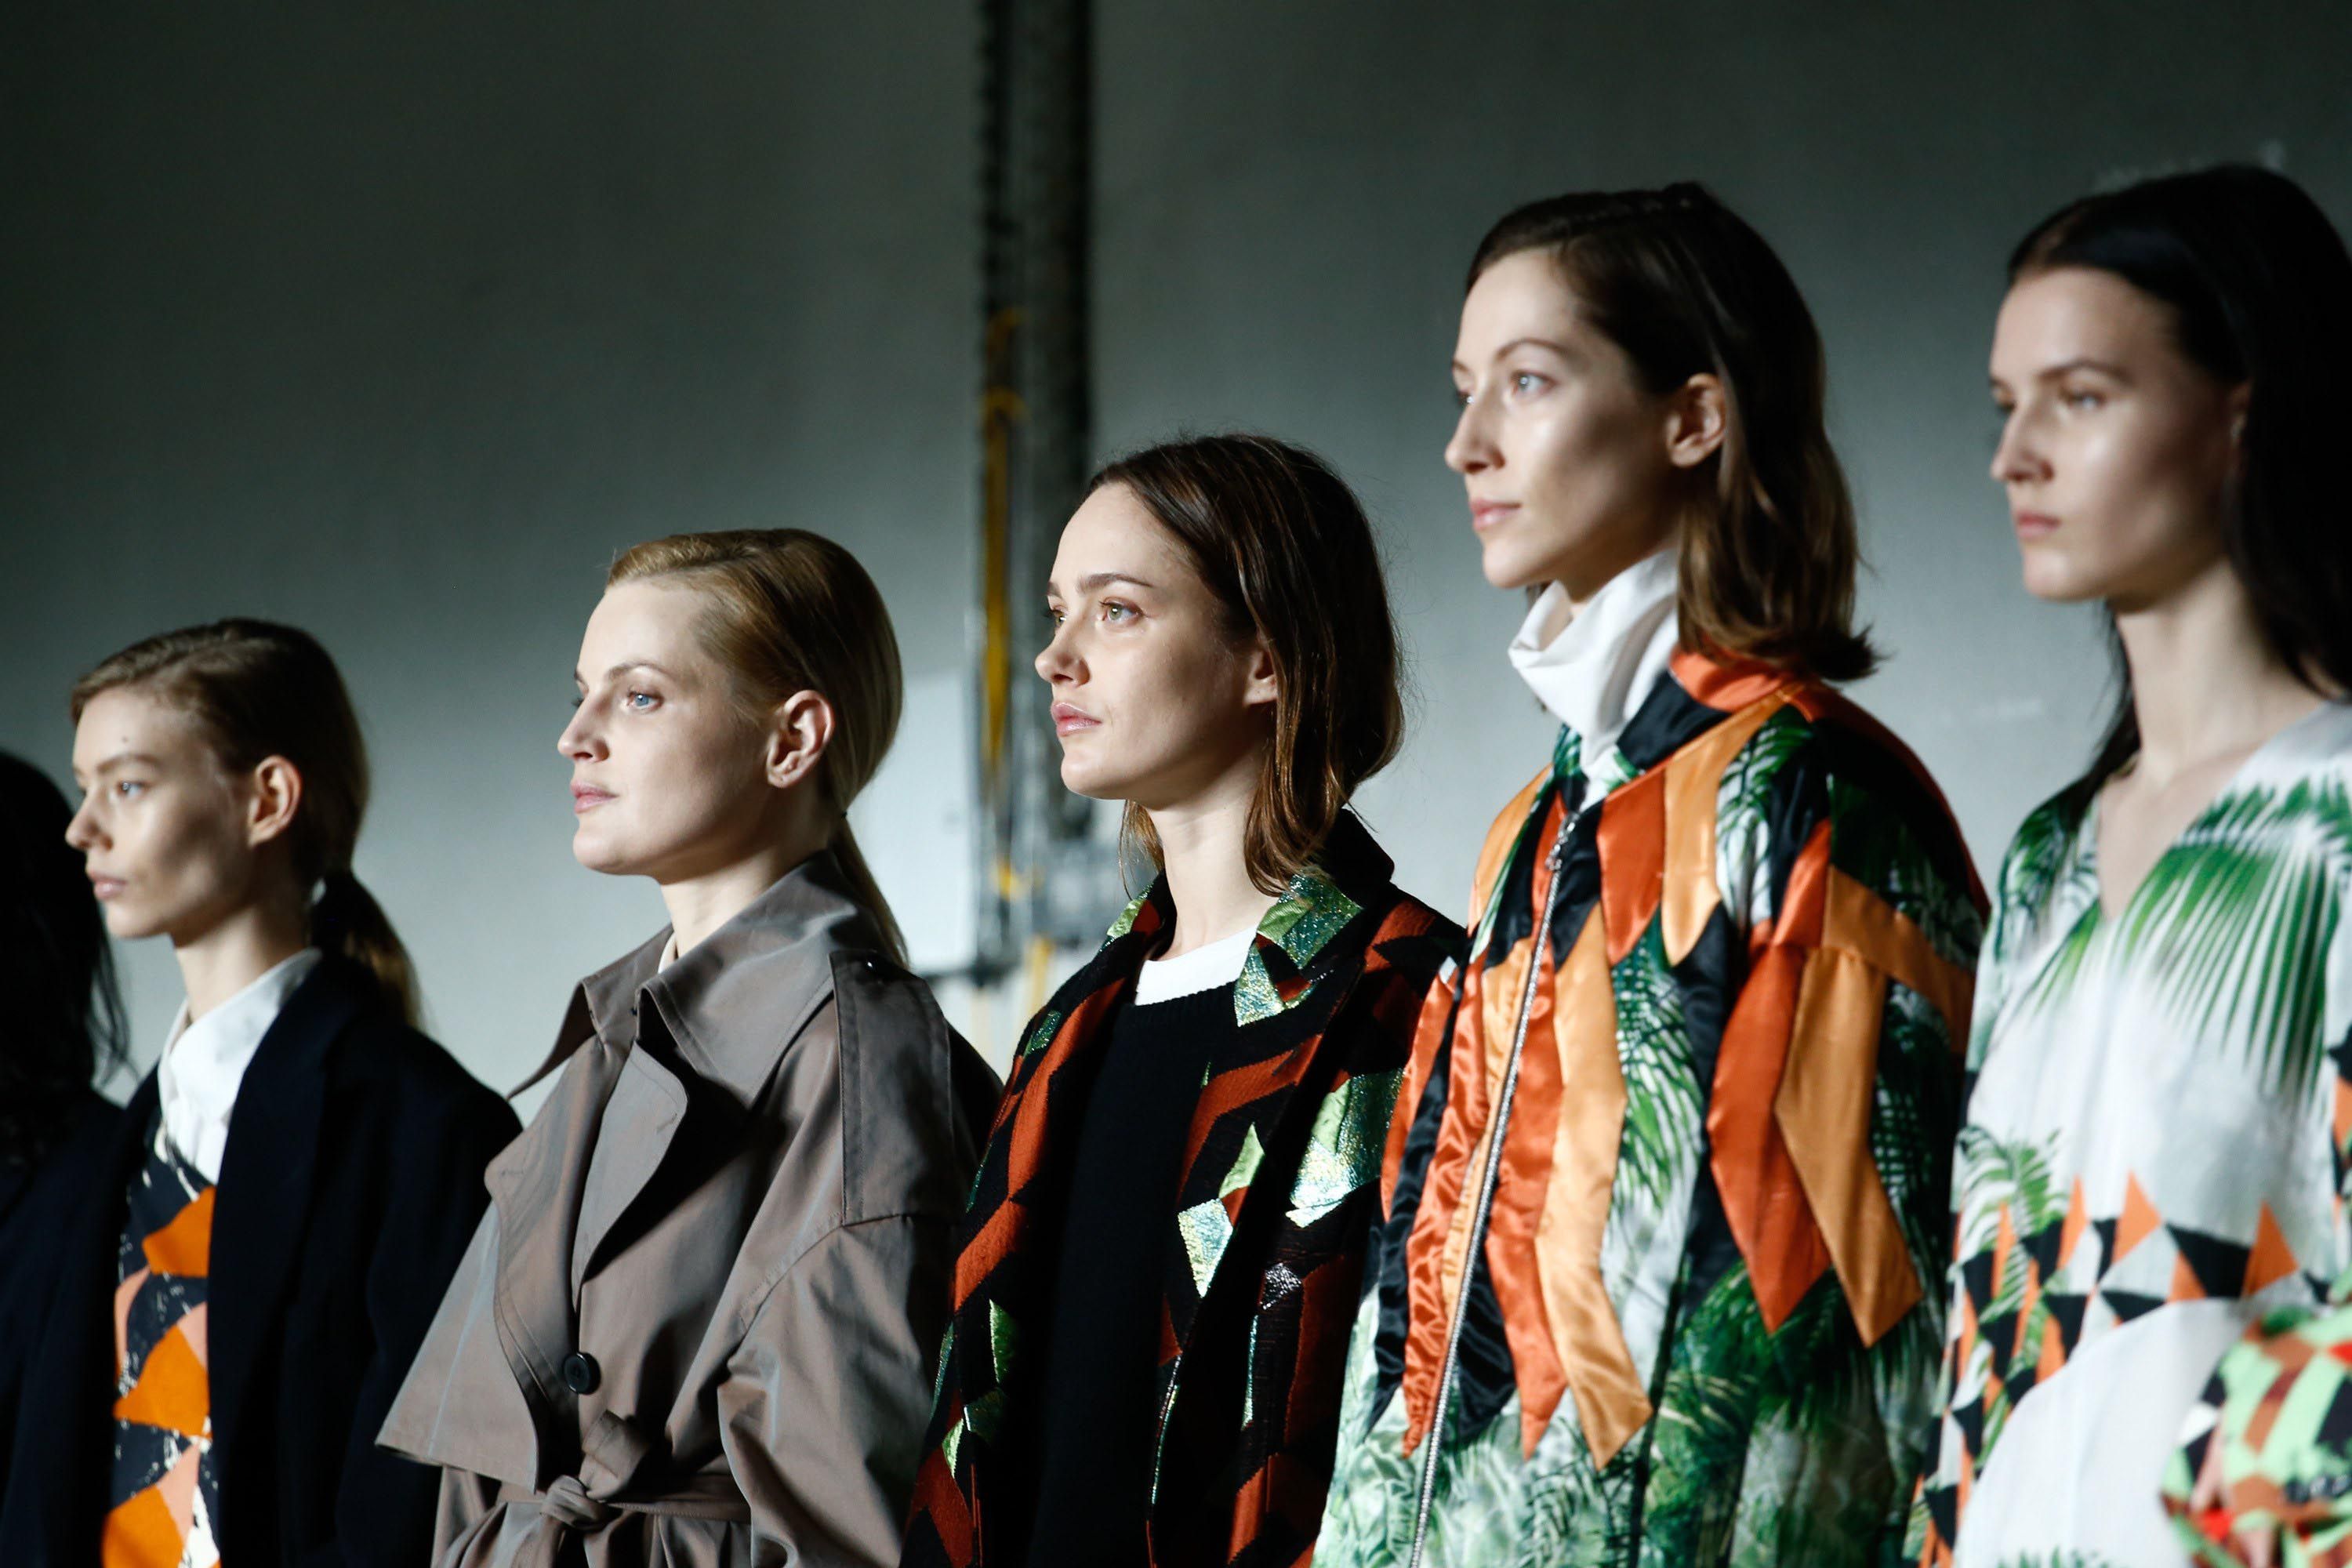 Celebrate 100th Show, Dries Van Noten Shows Beauty of Women at Every Age